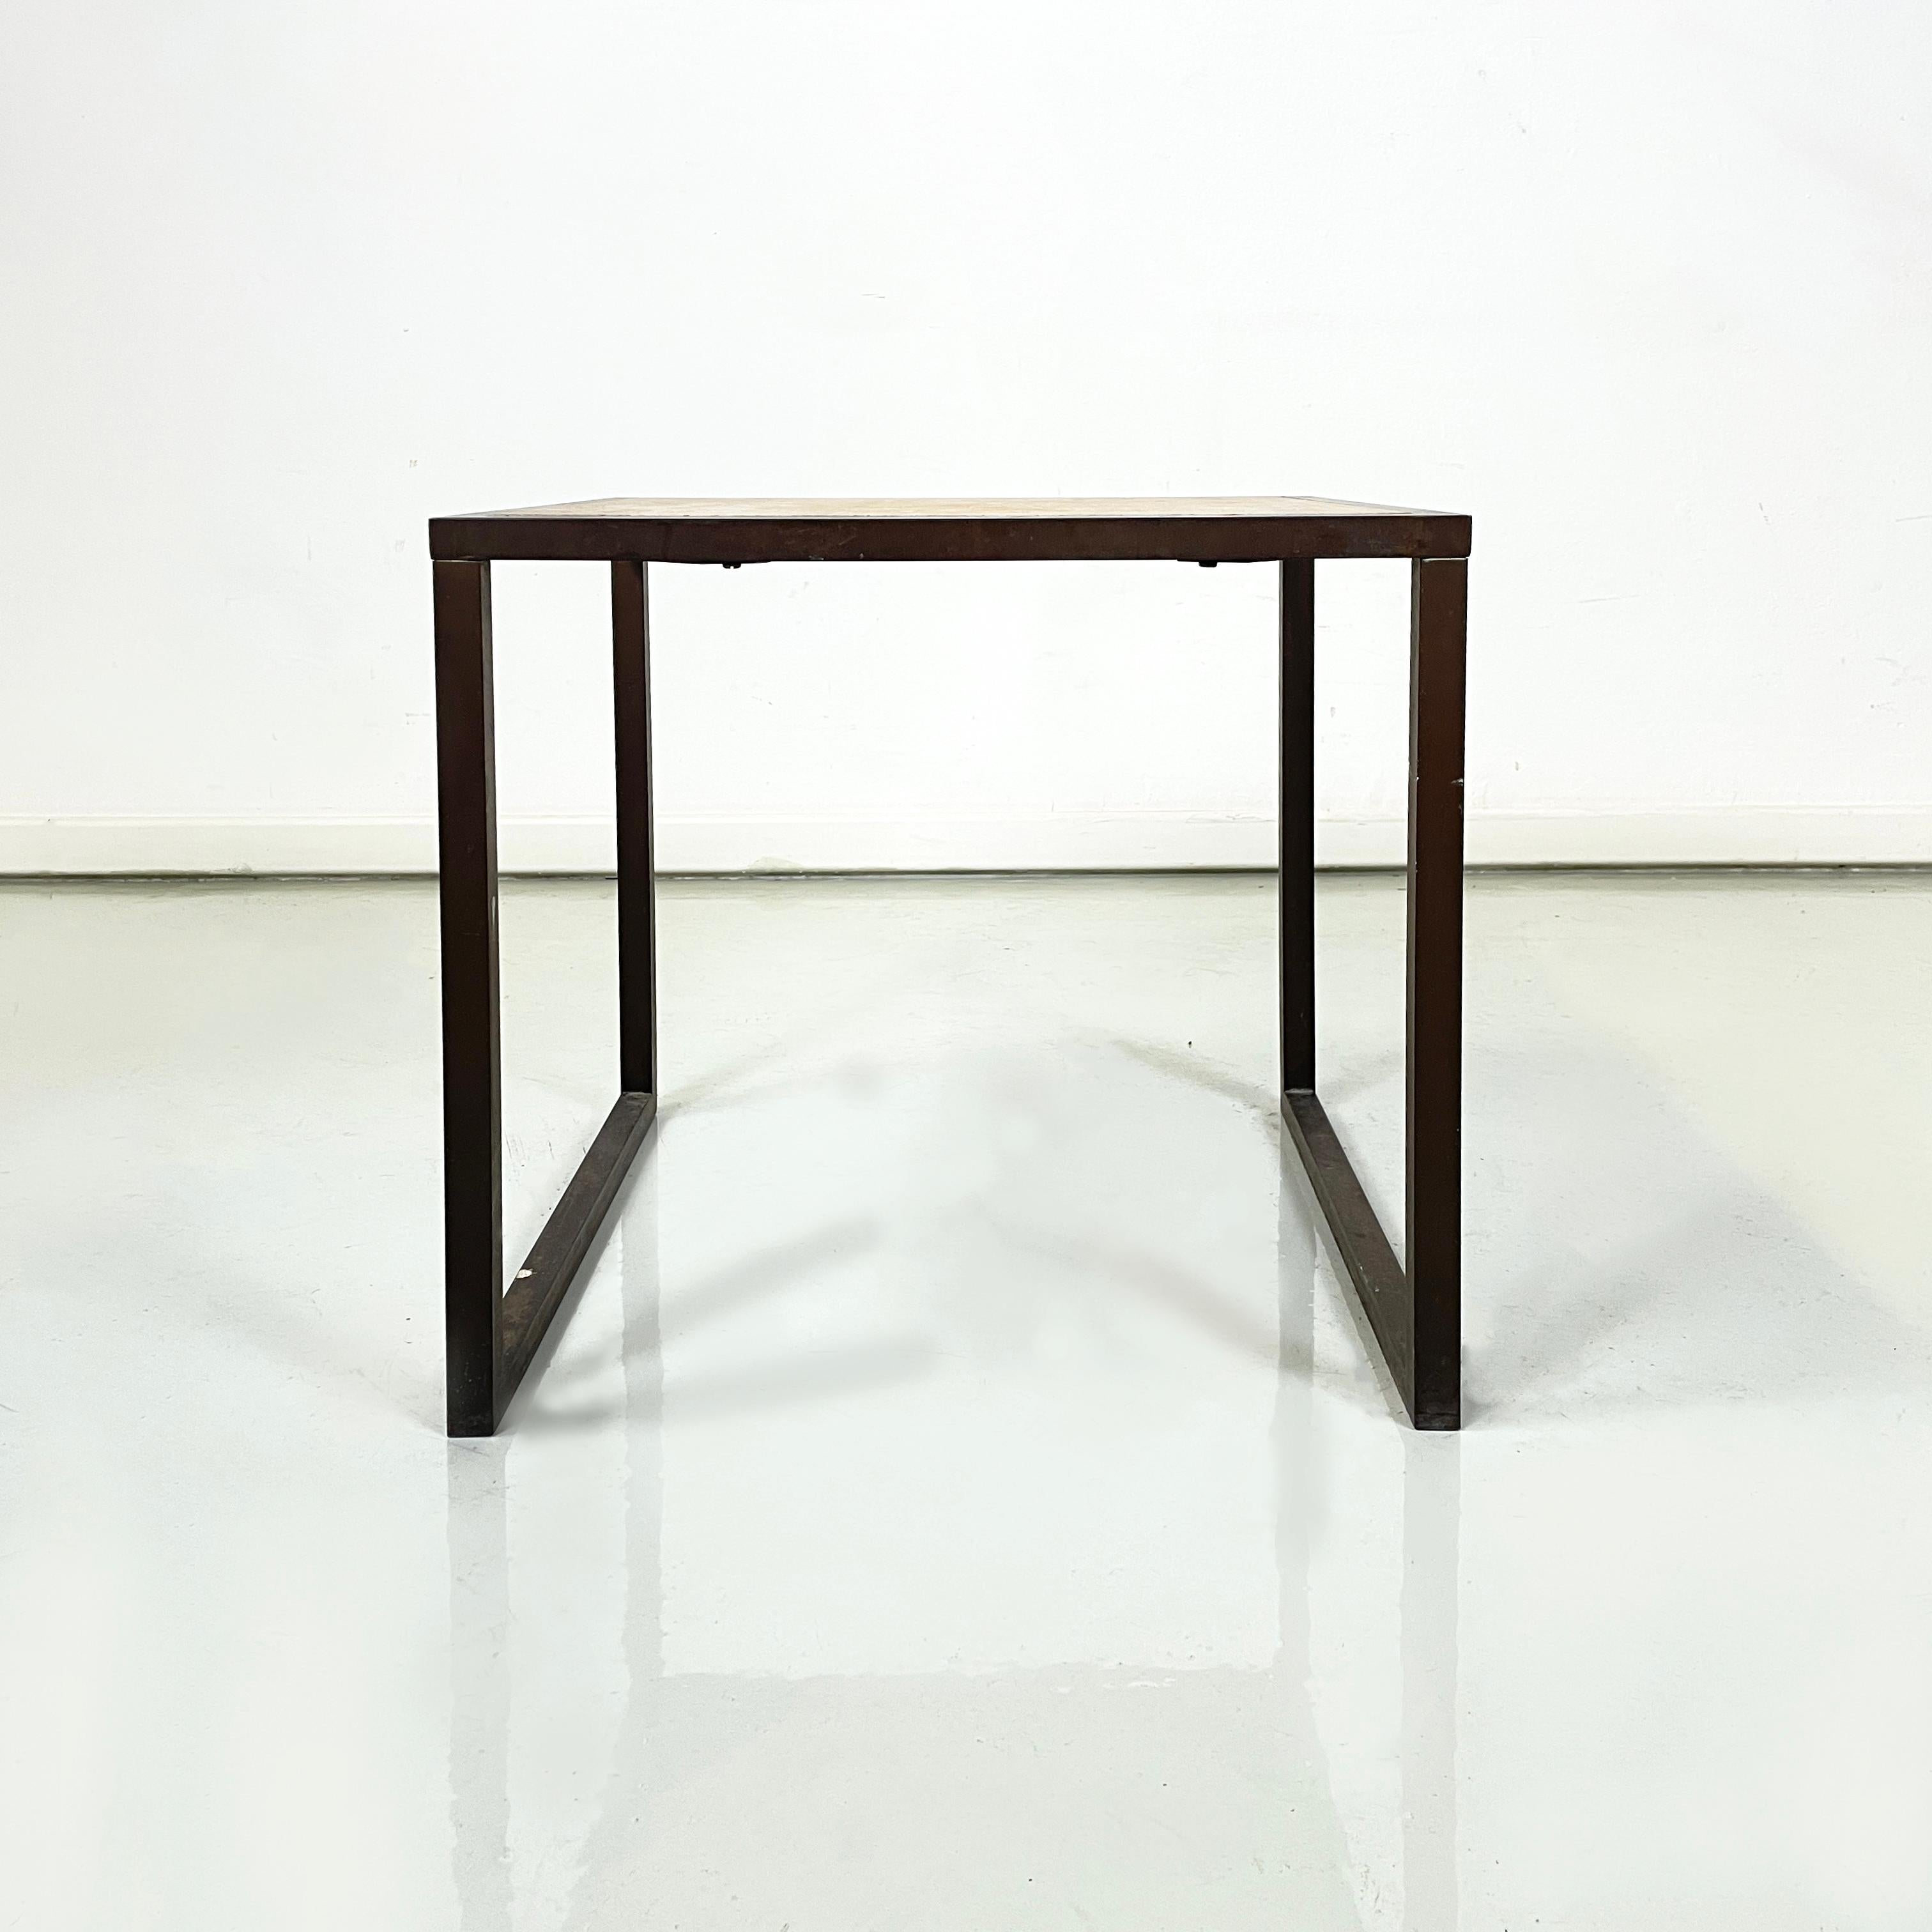 Italian modern Square coffee table in travertine and metal, 1970s
Coffee table with square travertine top. The structure, composed of the profile of the travertine slab and the legs, is made of square-section metal.
1970 approx.
Vintage condition,